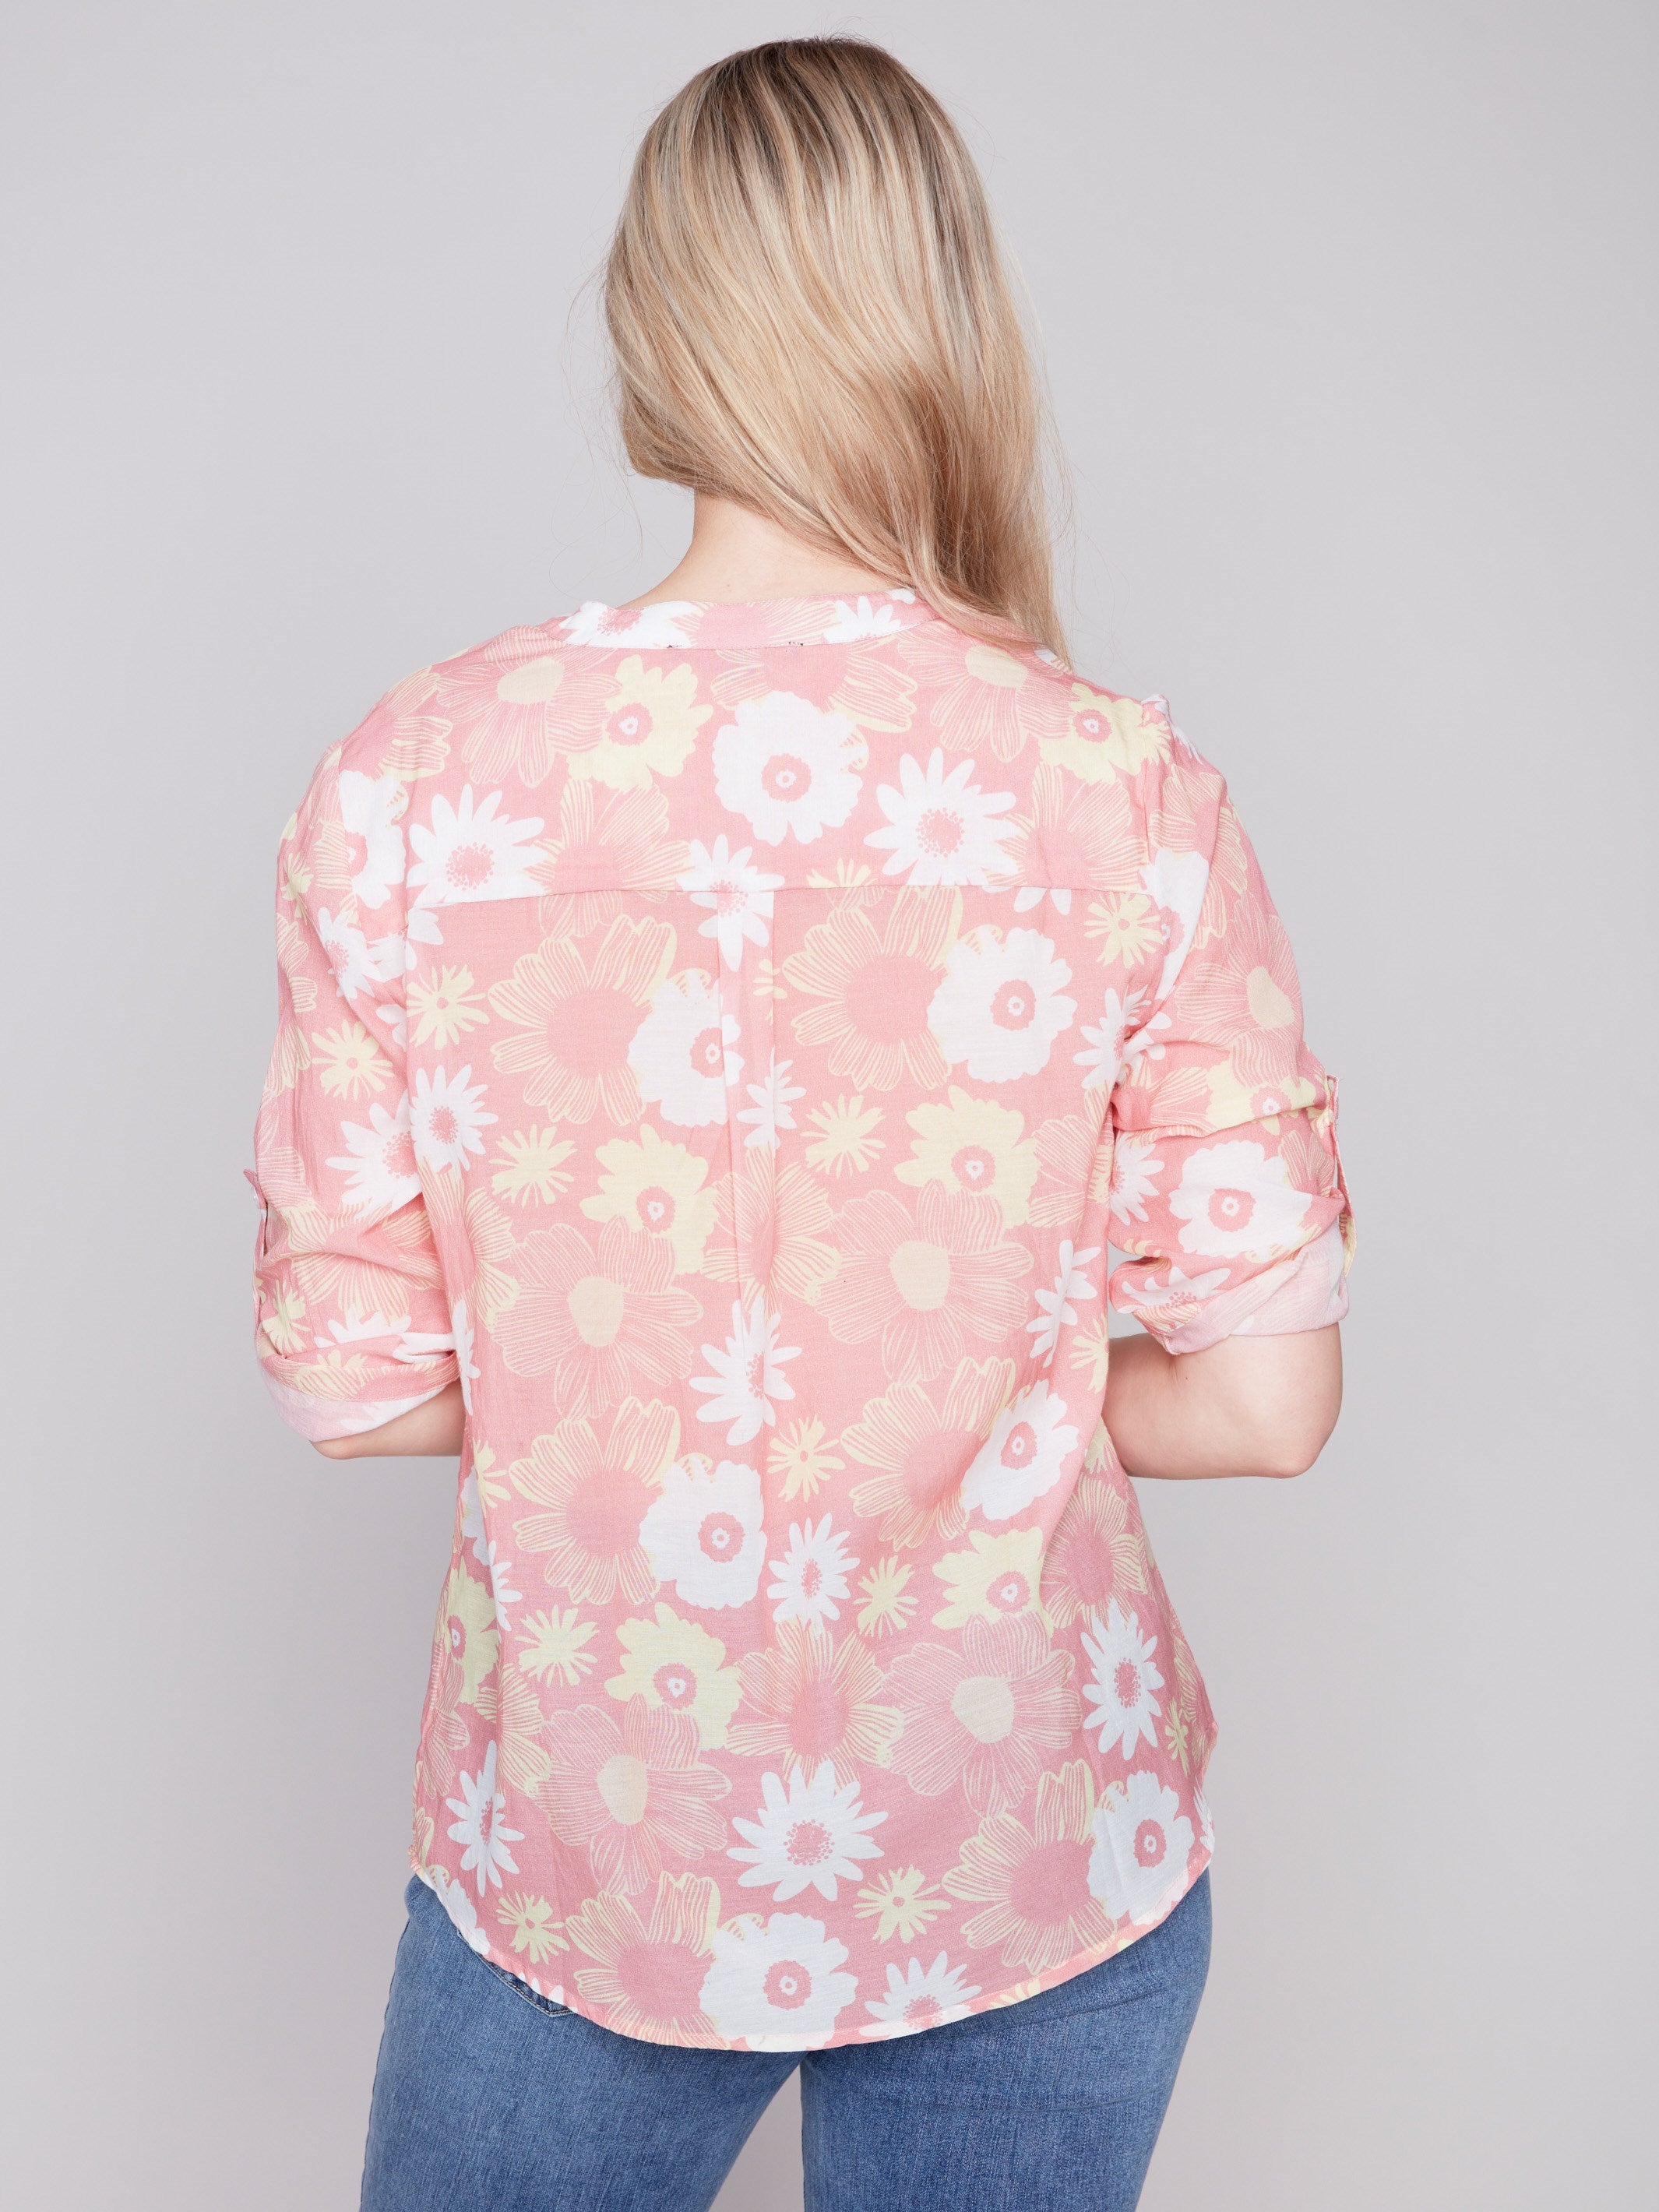 Charlie B Printed Half-Button Blouse - Cosmos - Image 3